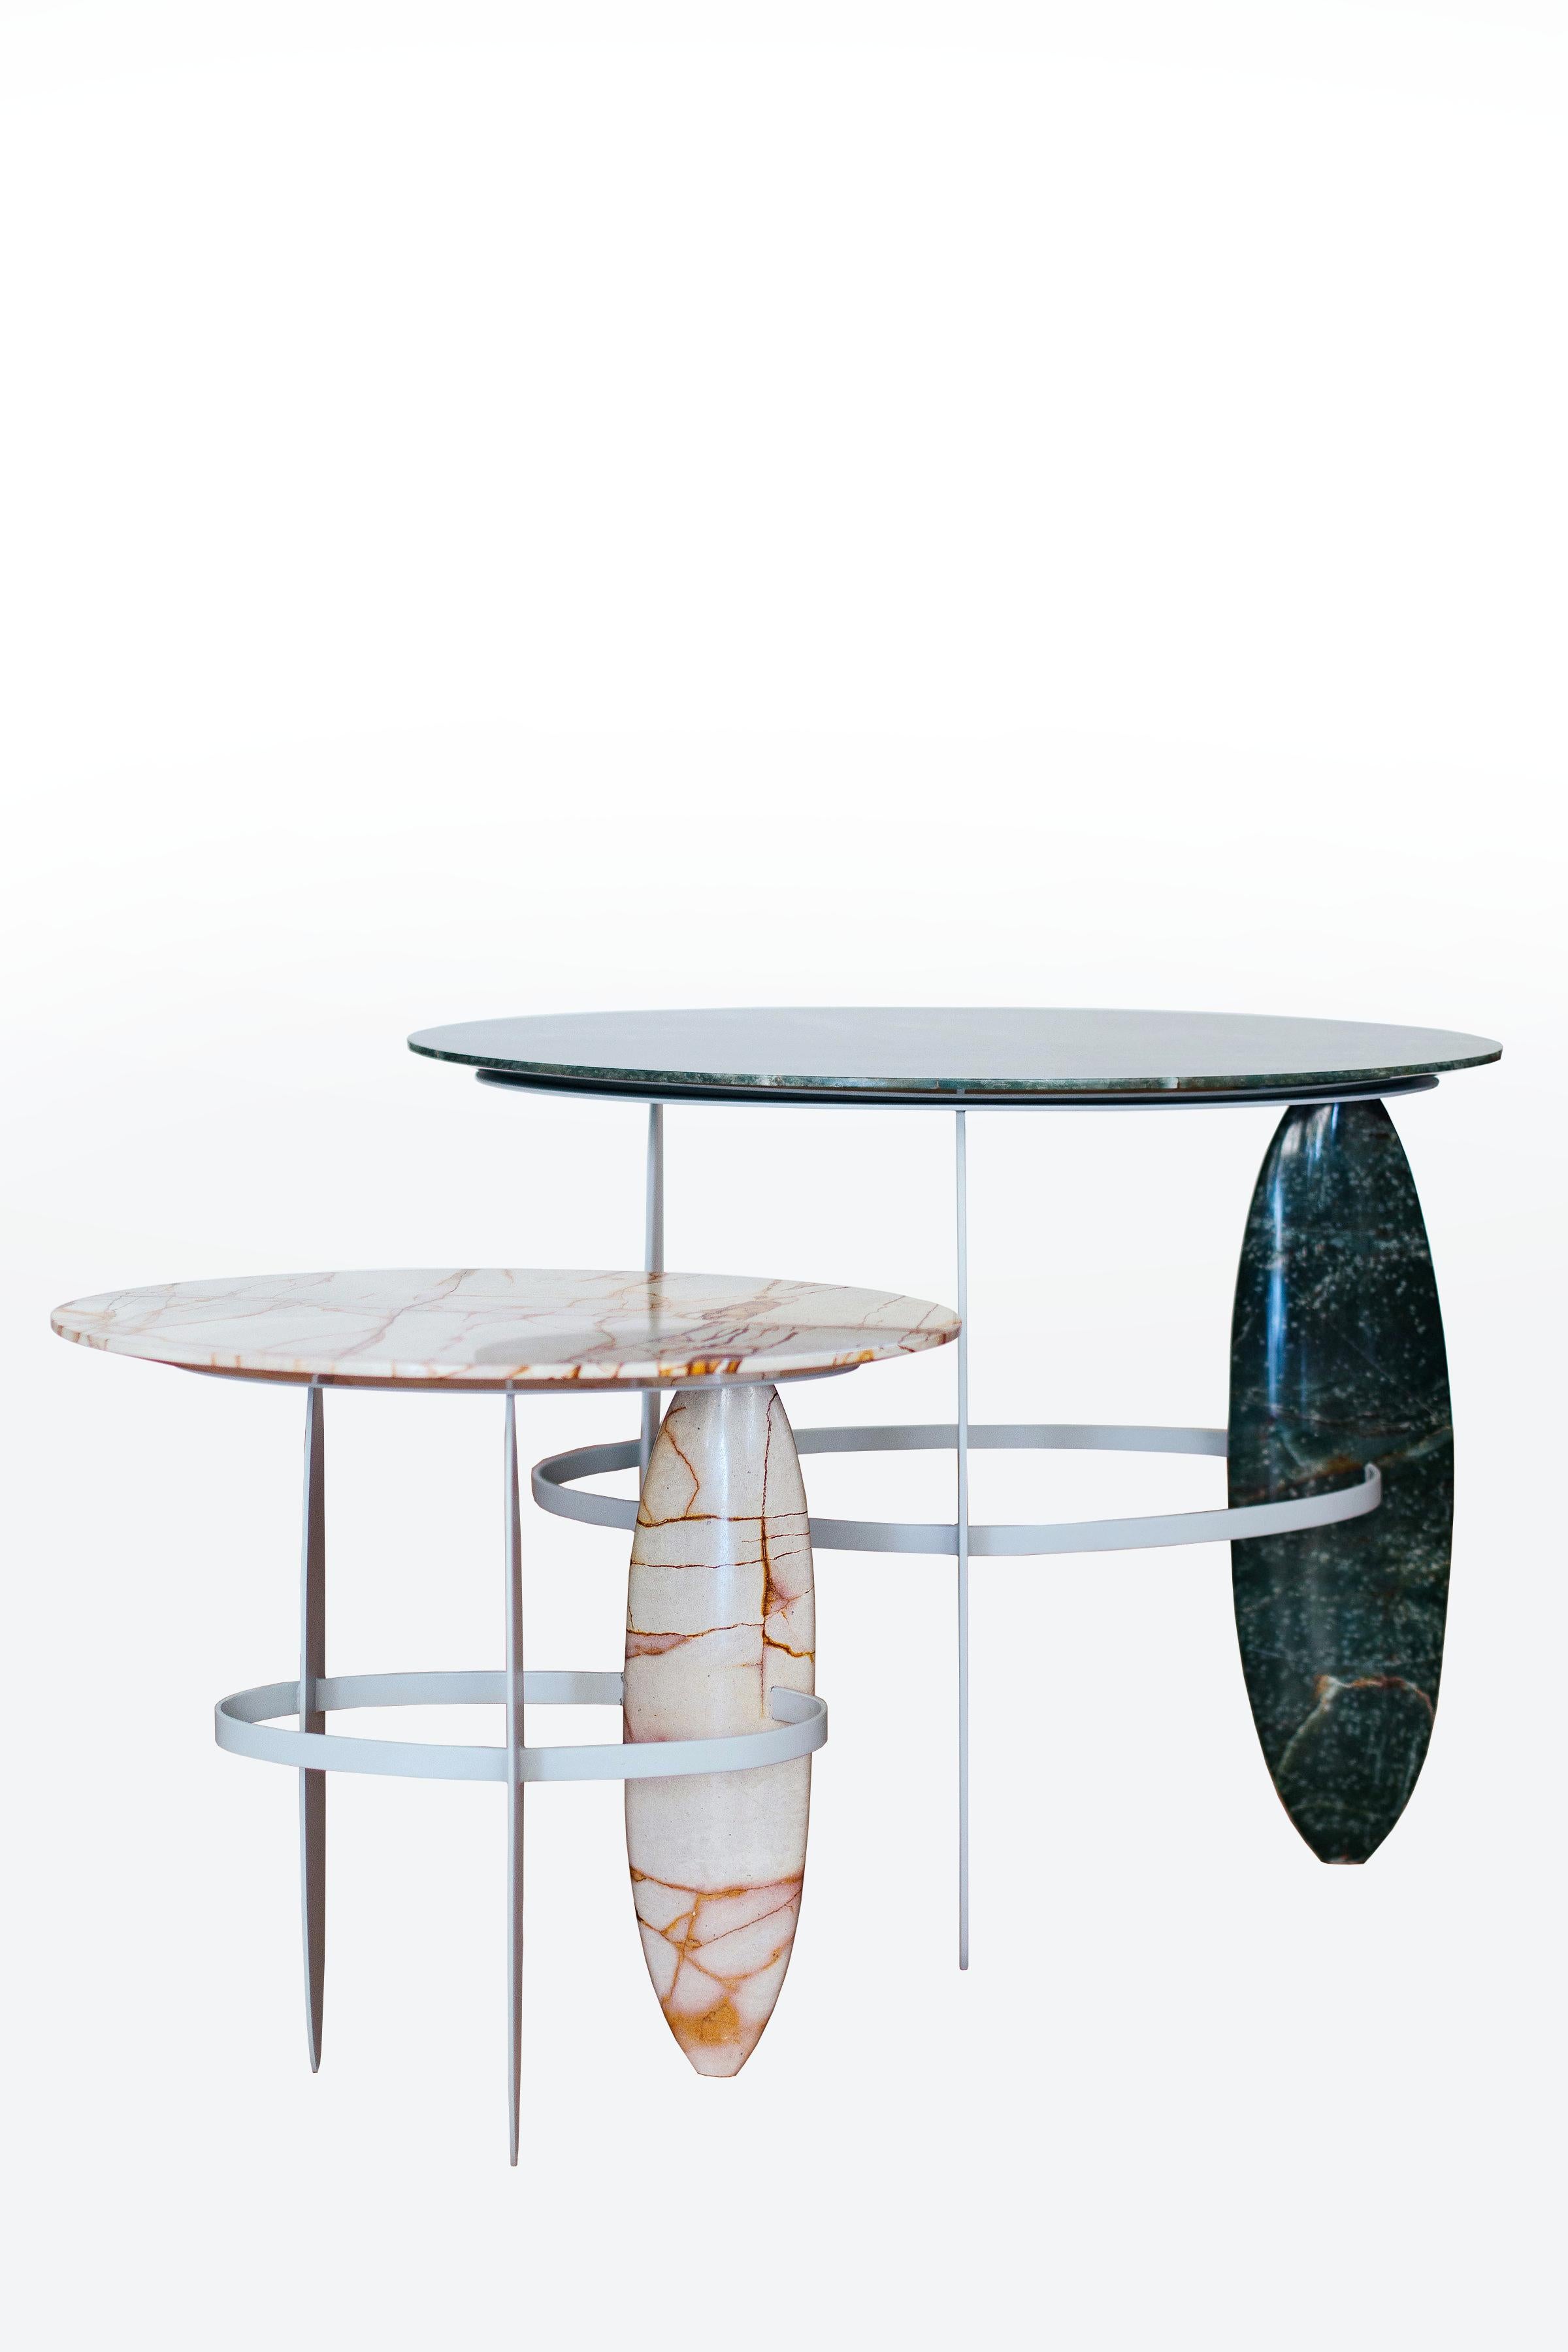 A set of sophisticated Brazilian semiprecious quartzite and pure quartz stone hand sculpted side table.  One table made with the rare Brazilian 